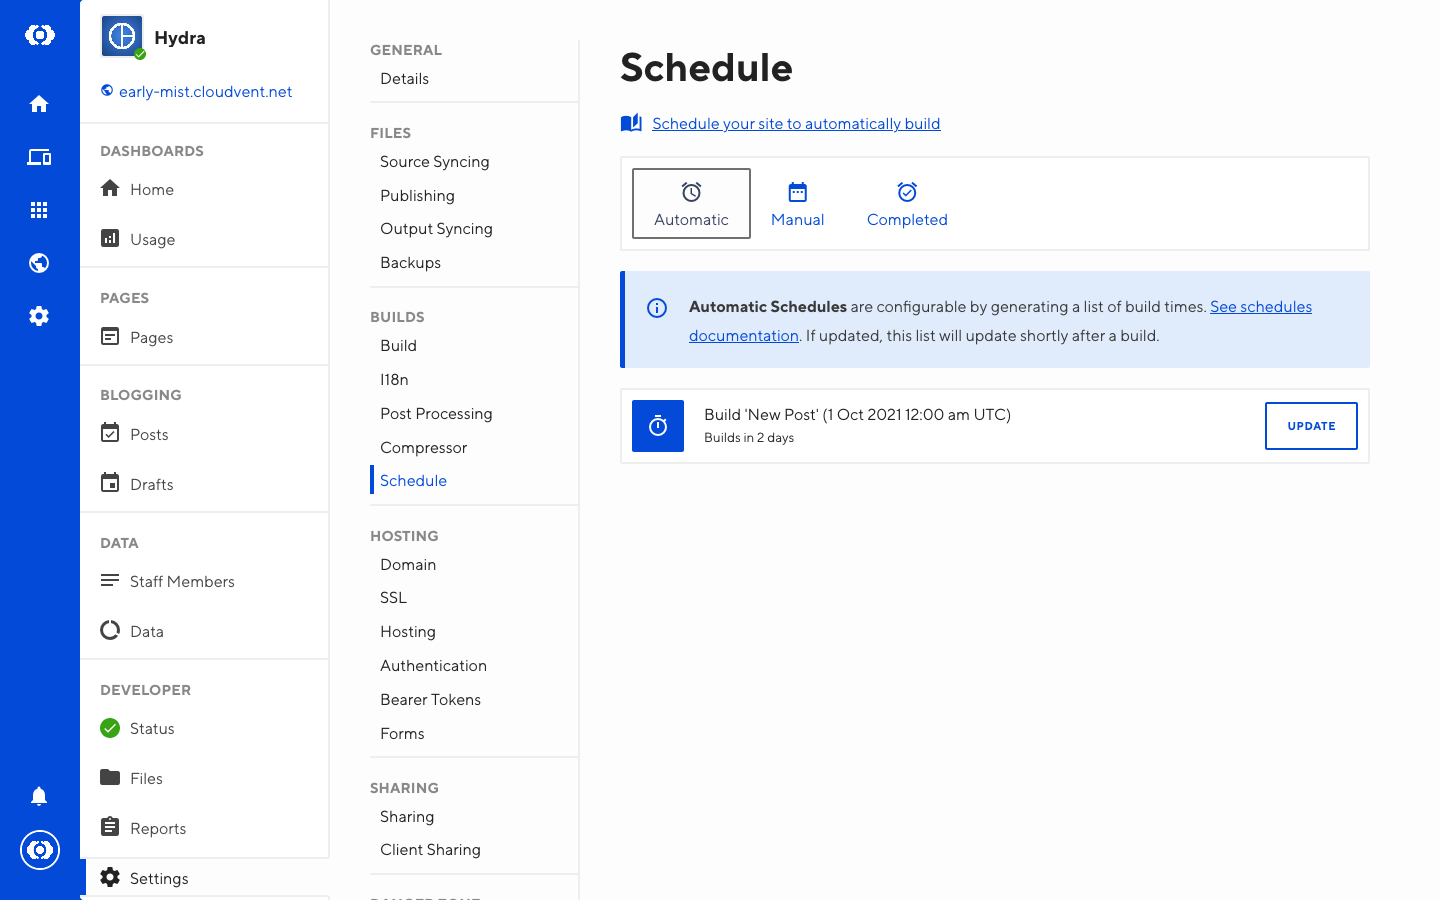 Automatic Builds Schedule interface